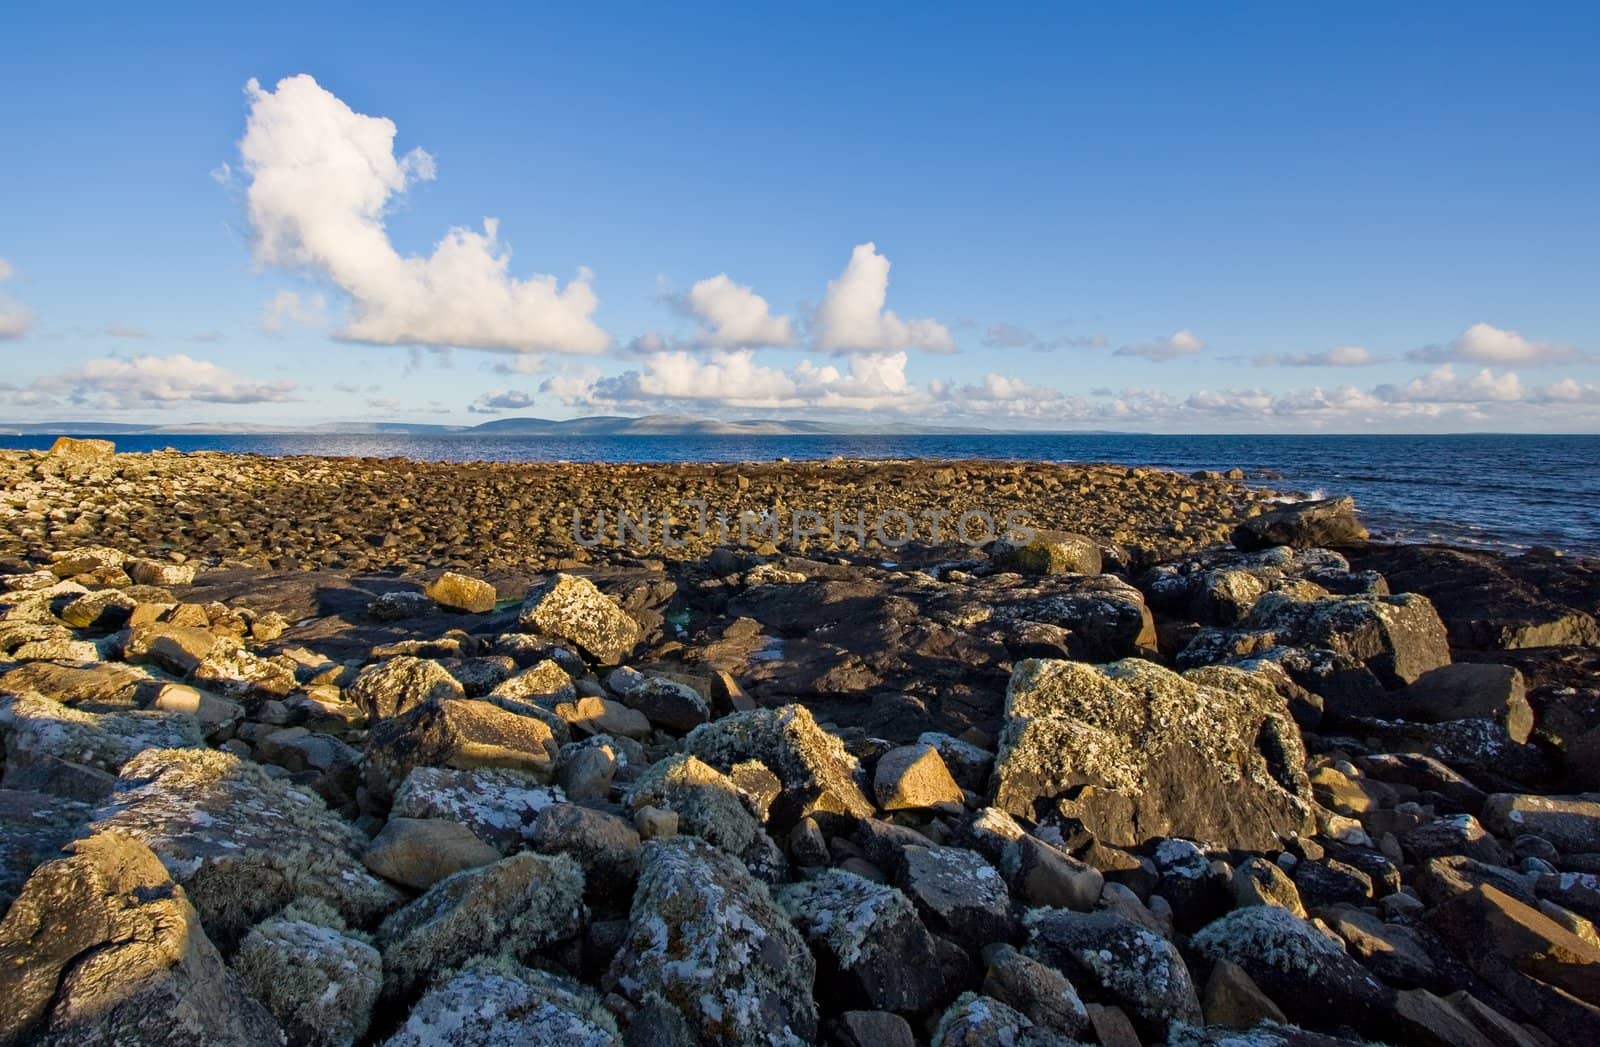 Galway Bay with a large rock jetty in the foreground. The Burren can be seen in the background with cumulus clouds against a blue sky.